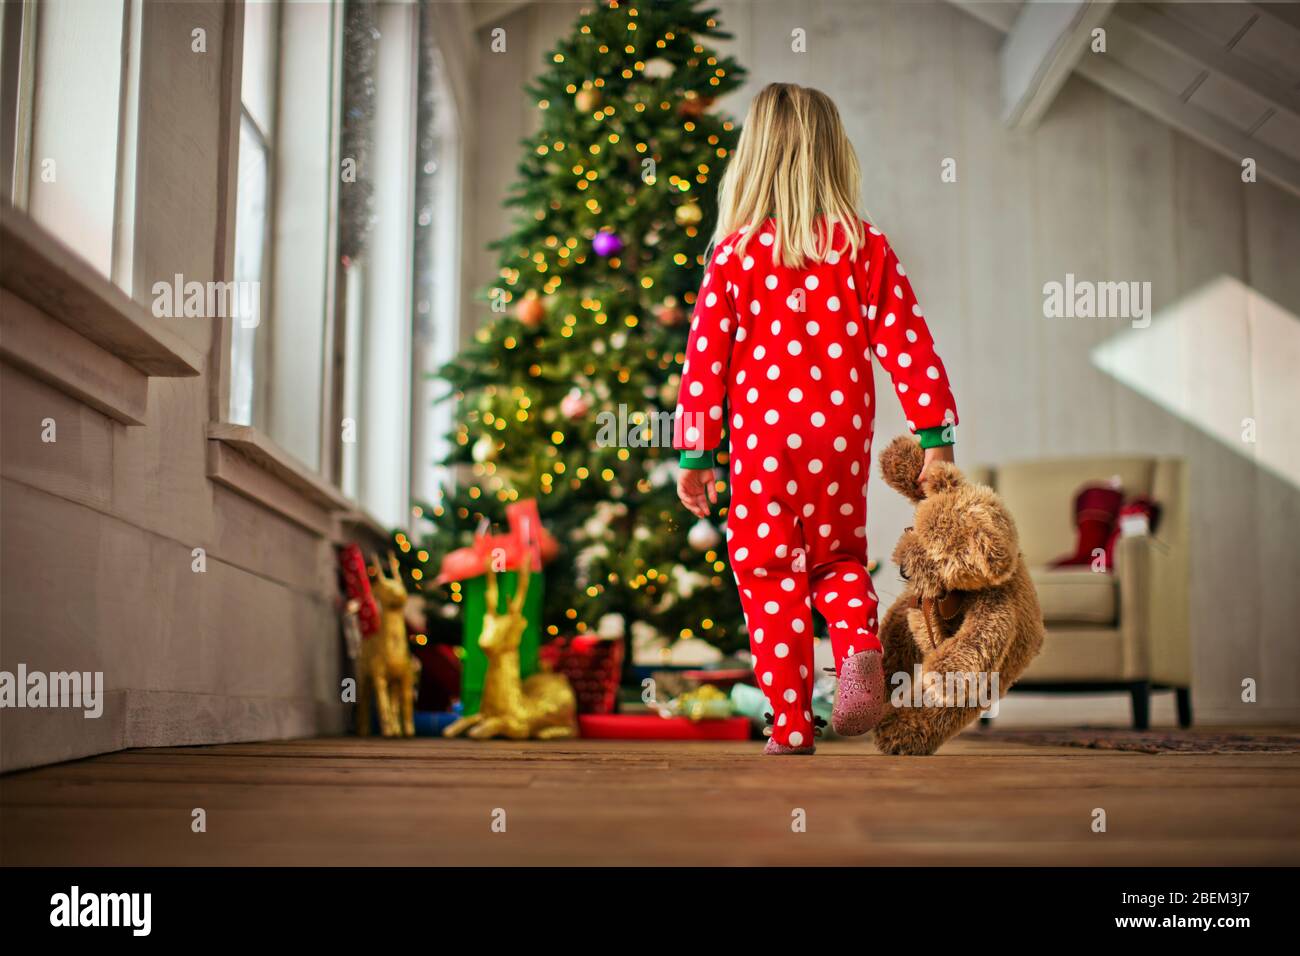 Young girl walking towards a Christmas tree carrying her teddy bear Stock Photo